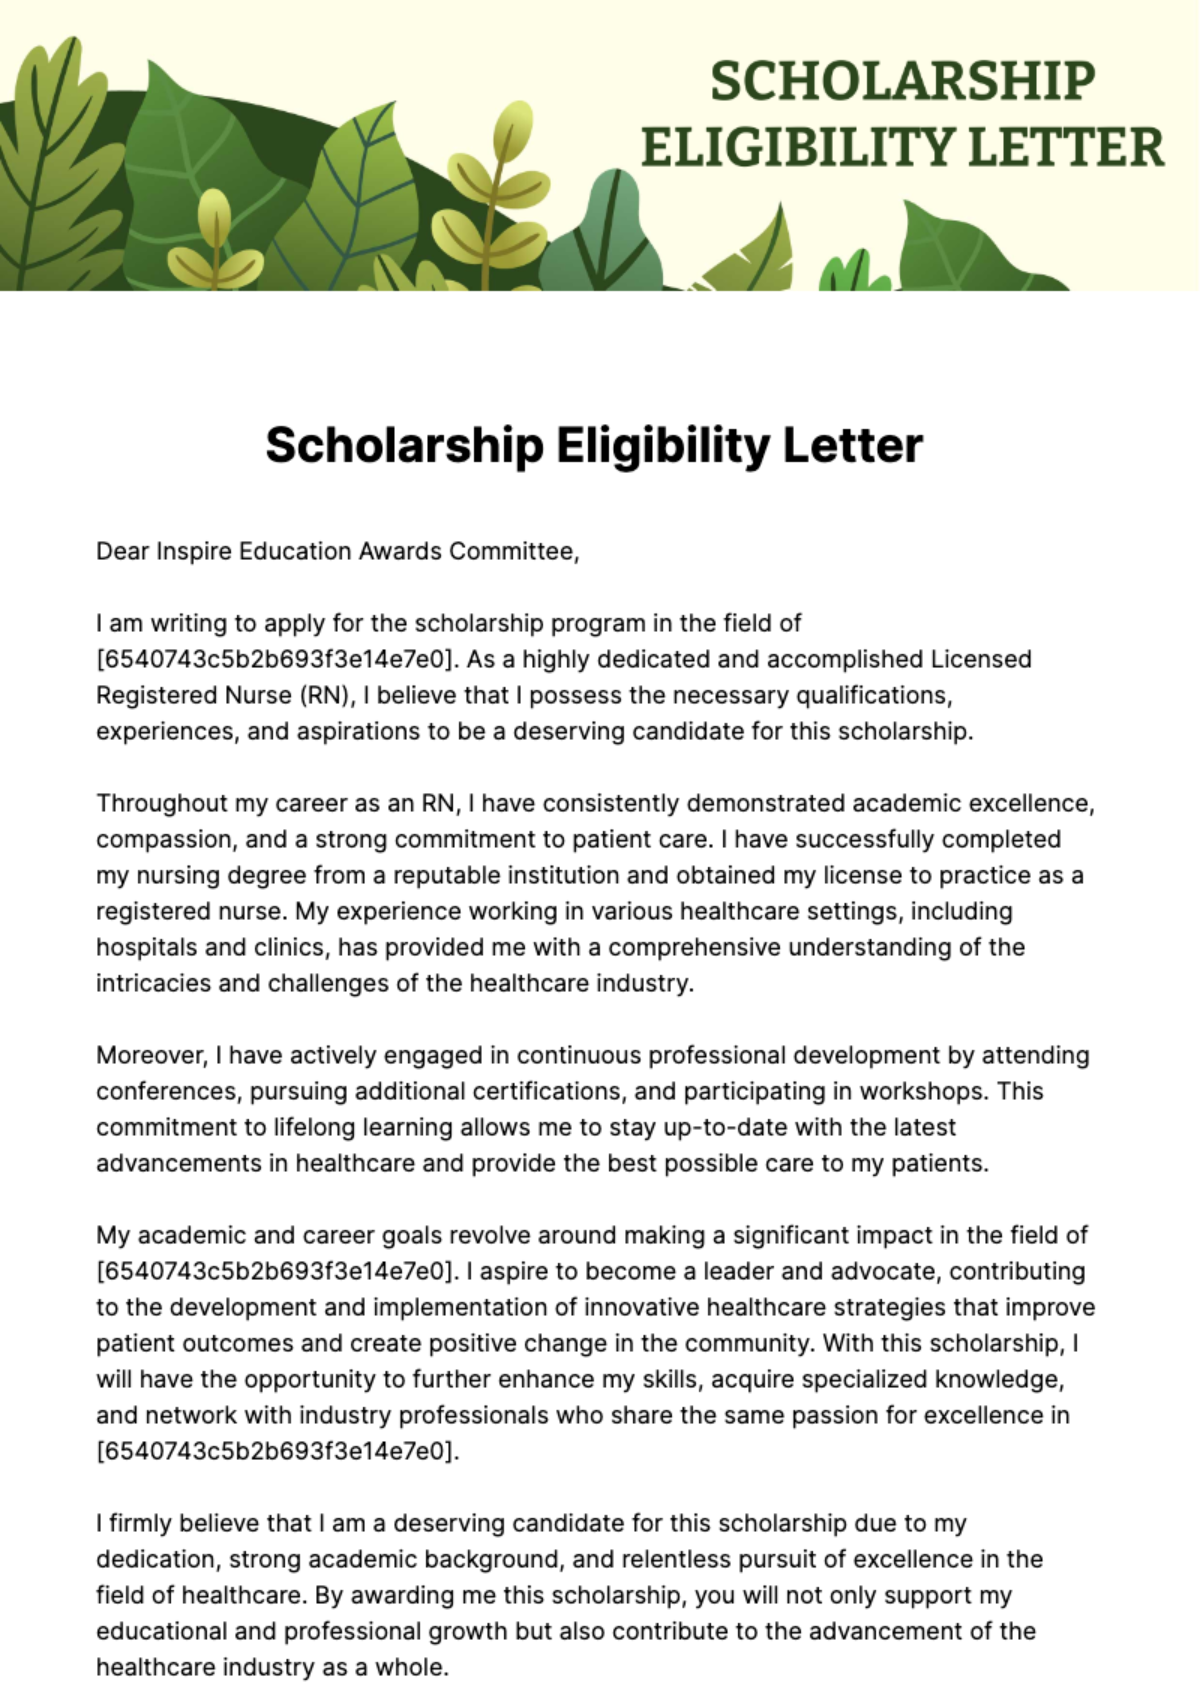 Free Scholarship Eligibility Letter Template